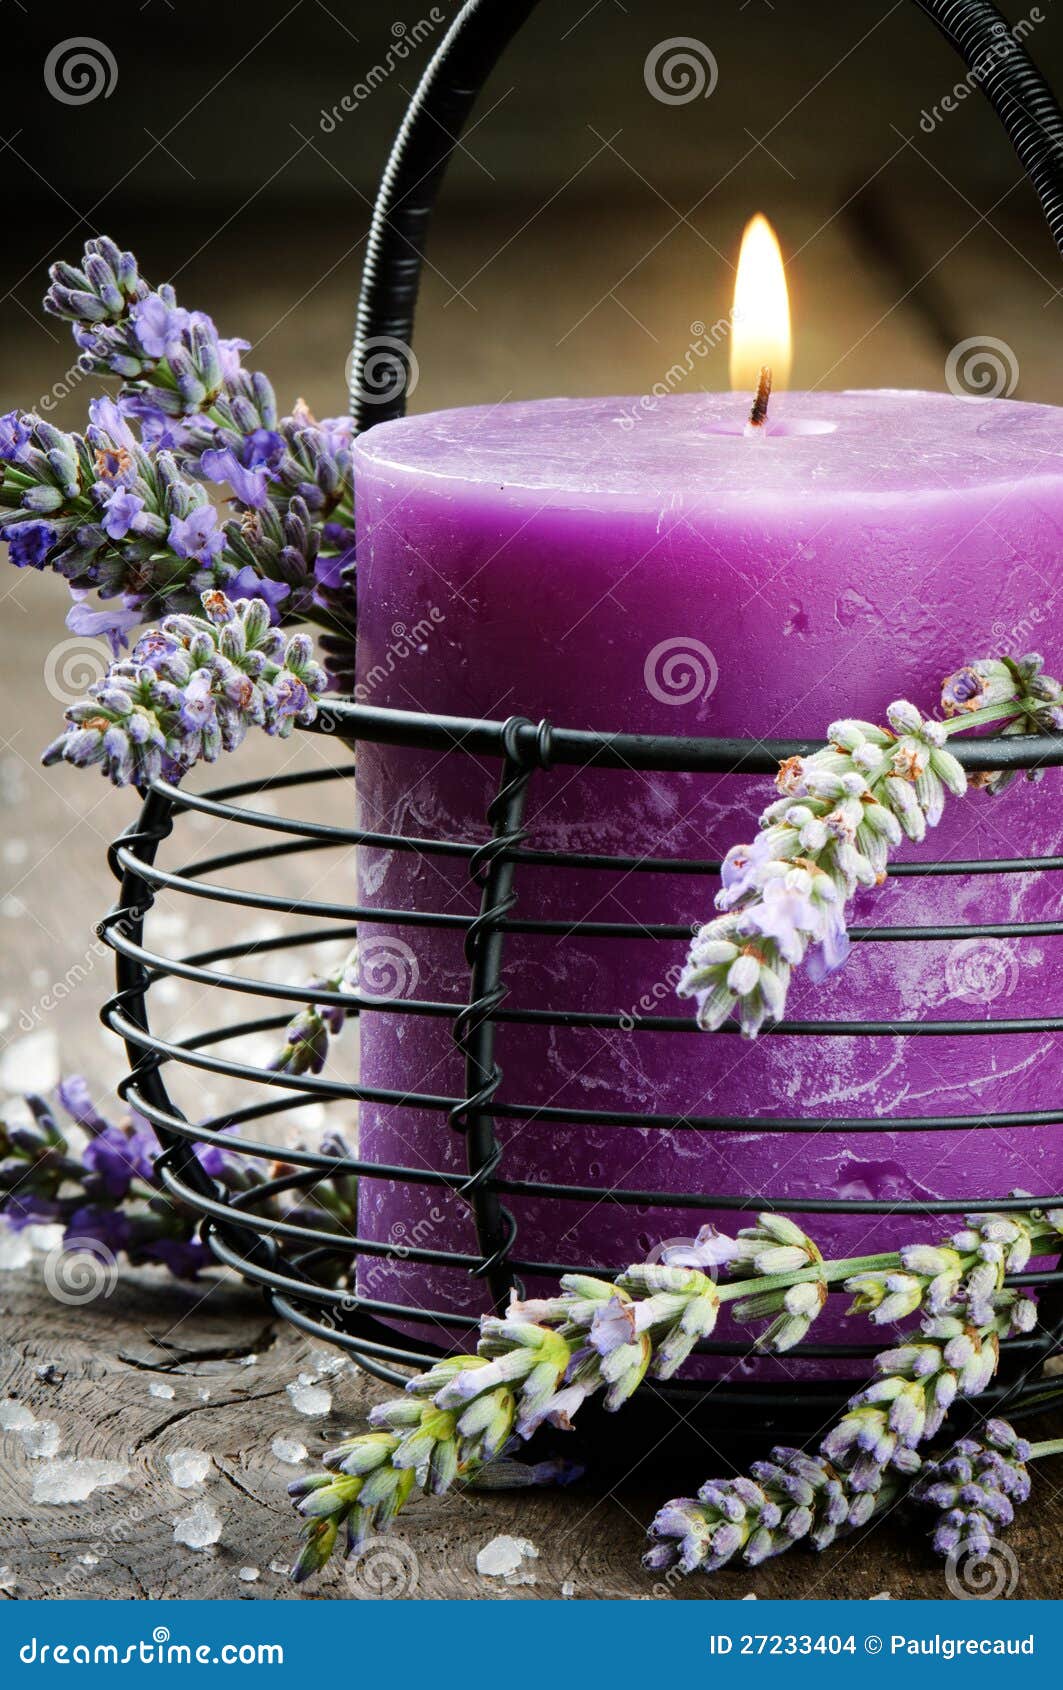 Candle With Lavender Flowers | Modern Diy Art Design Collection